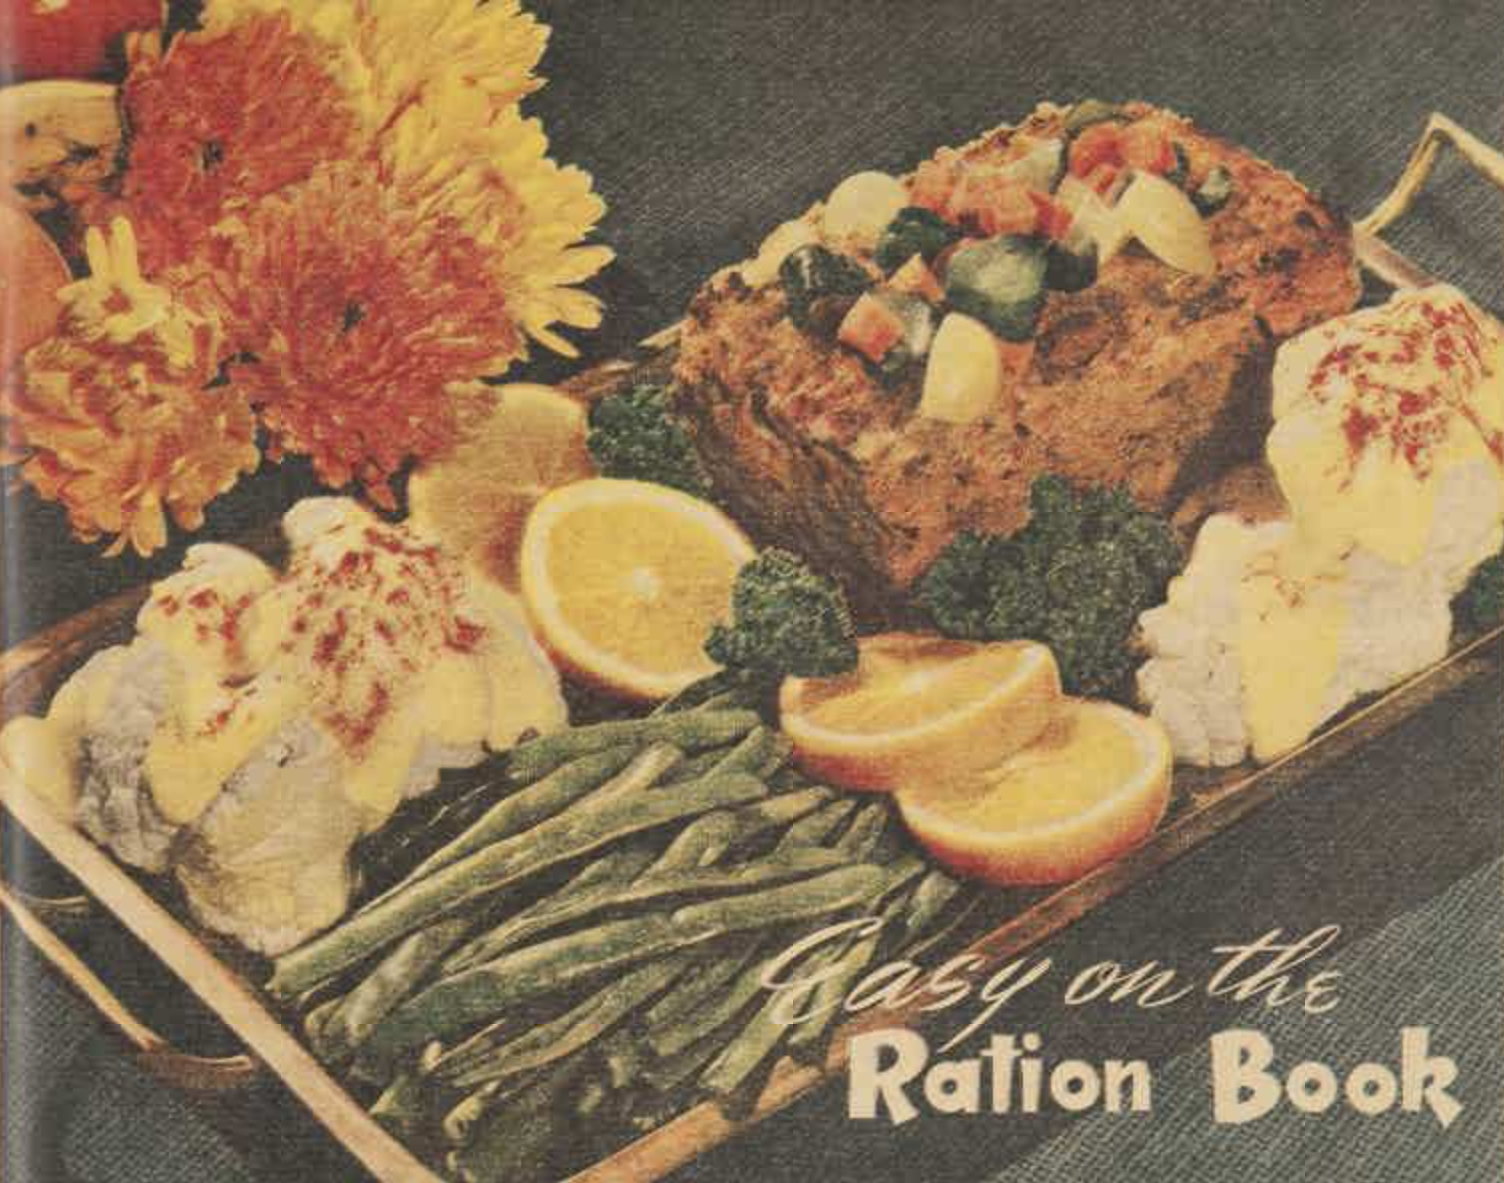 serving dish with food - text says easy on the ration book